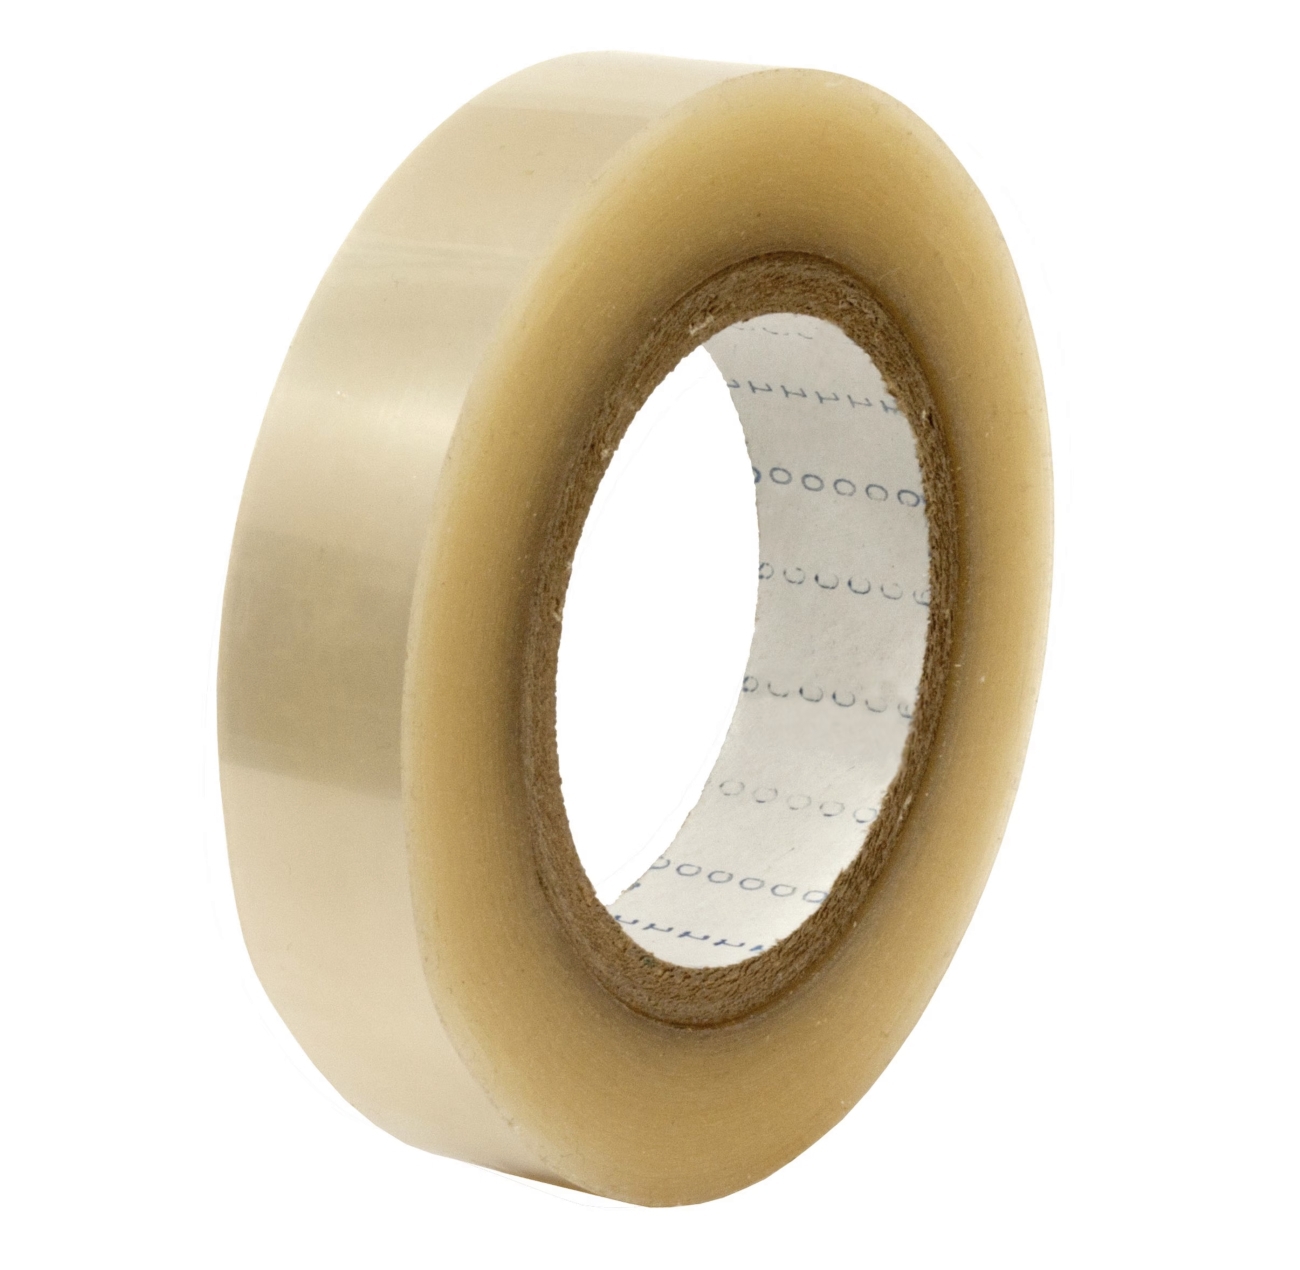 S-K-S double-sided adhesive tape with polyester backing 960, transparent, 12 mm x 66 m, silicone adhesive, 0.085 mm